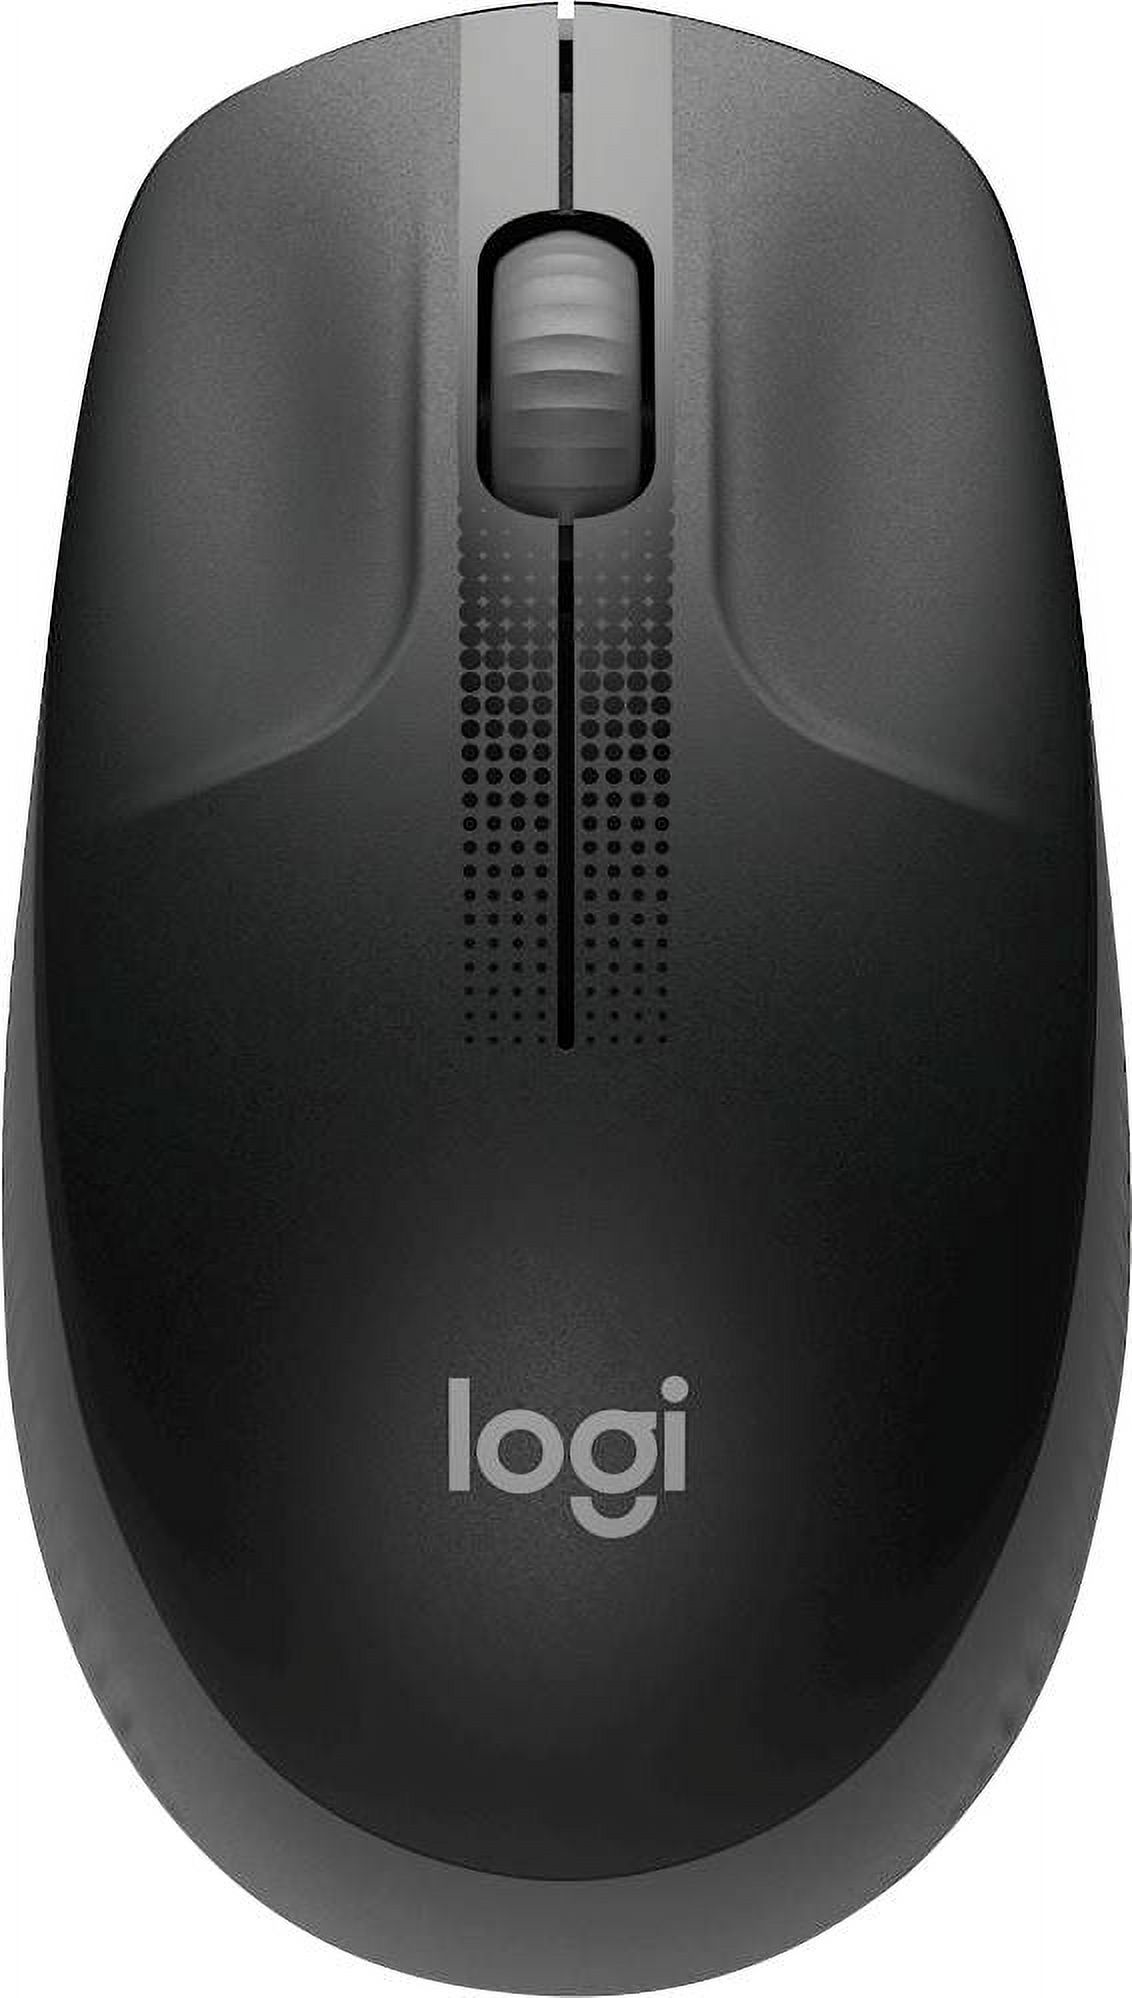 Logitech M190 Full-Sized Wireless Mouse, Charcoal - image 1 of 4